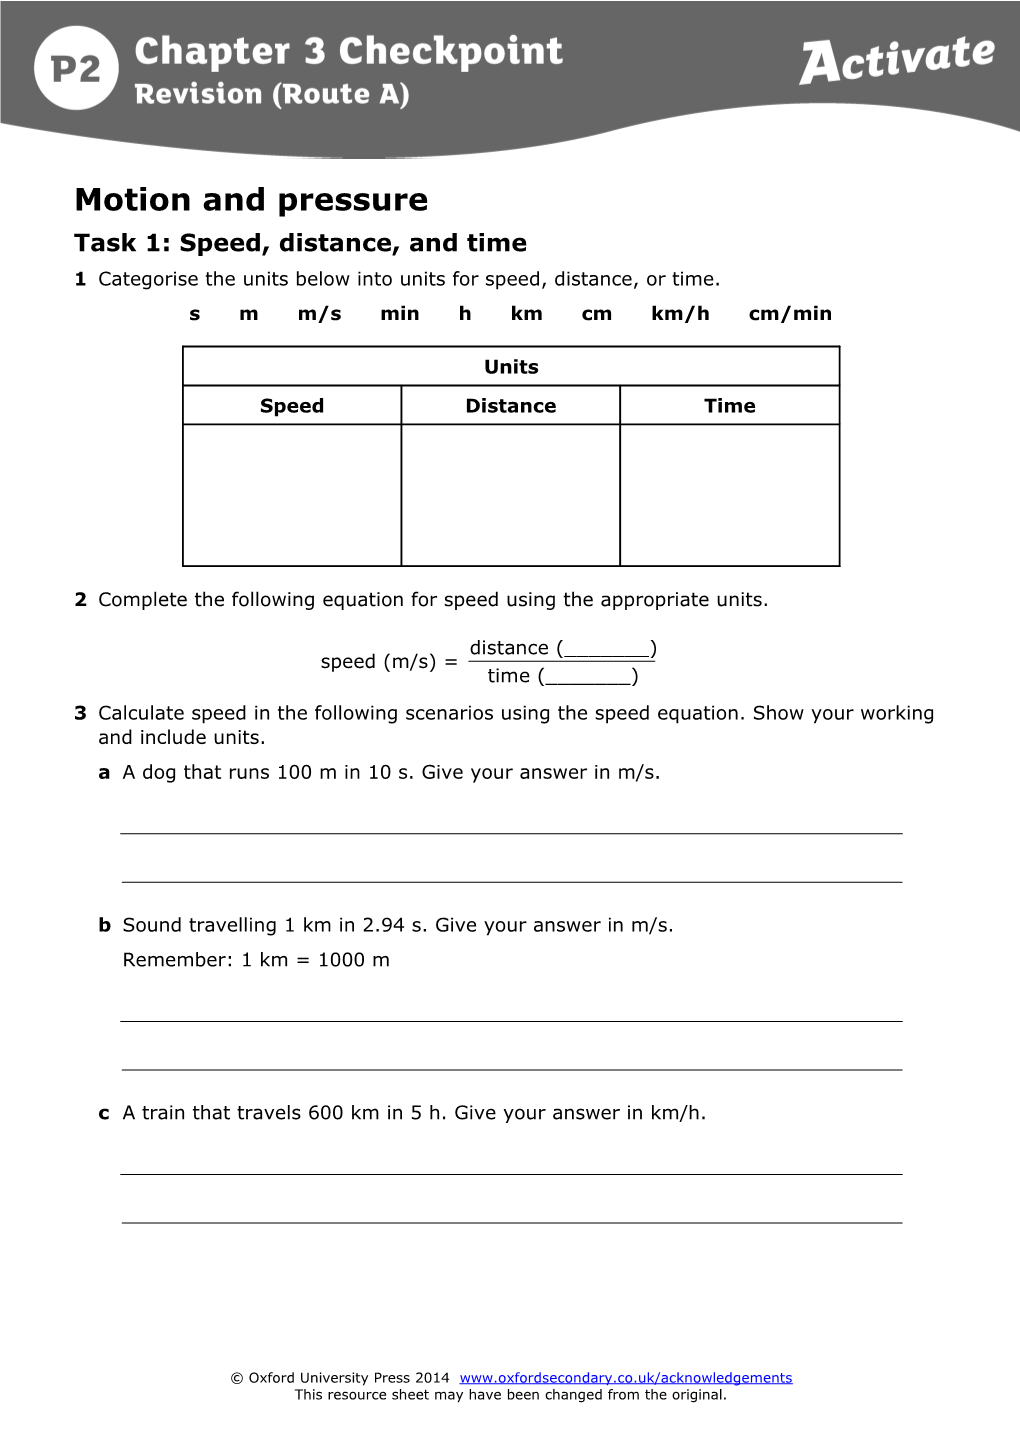 Task 1: Speed, Distance, and Time